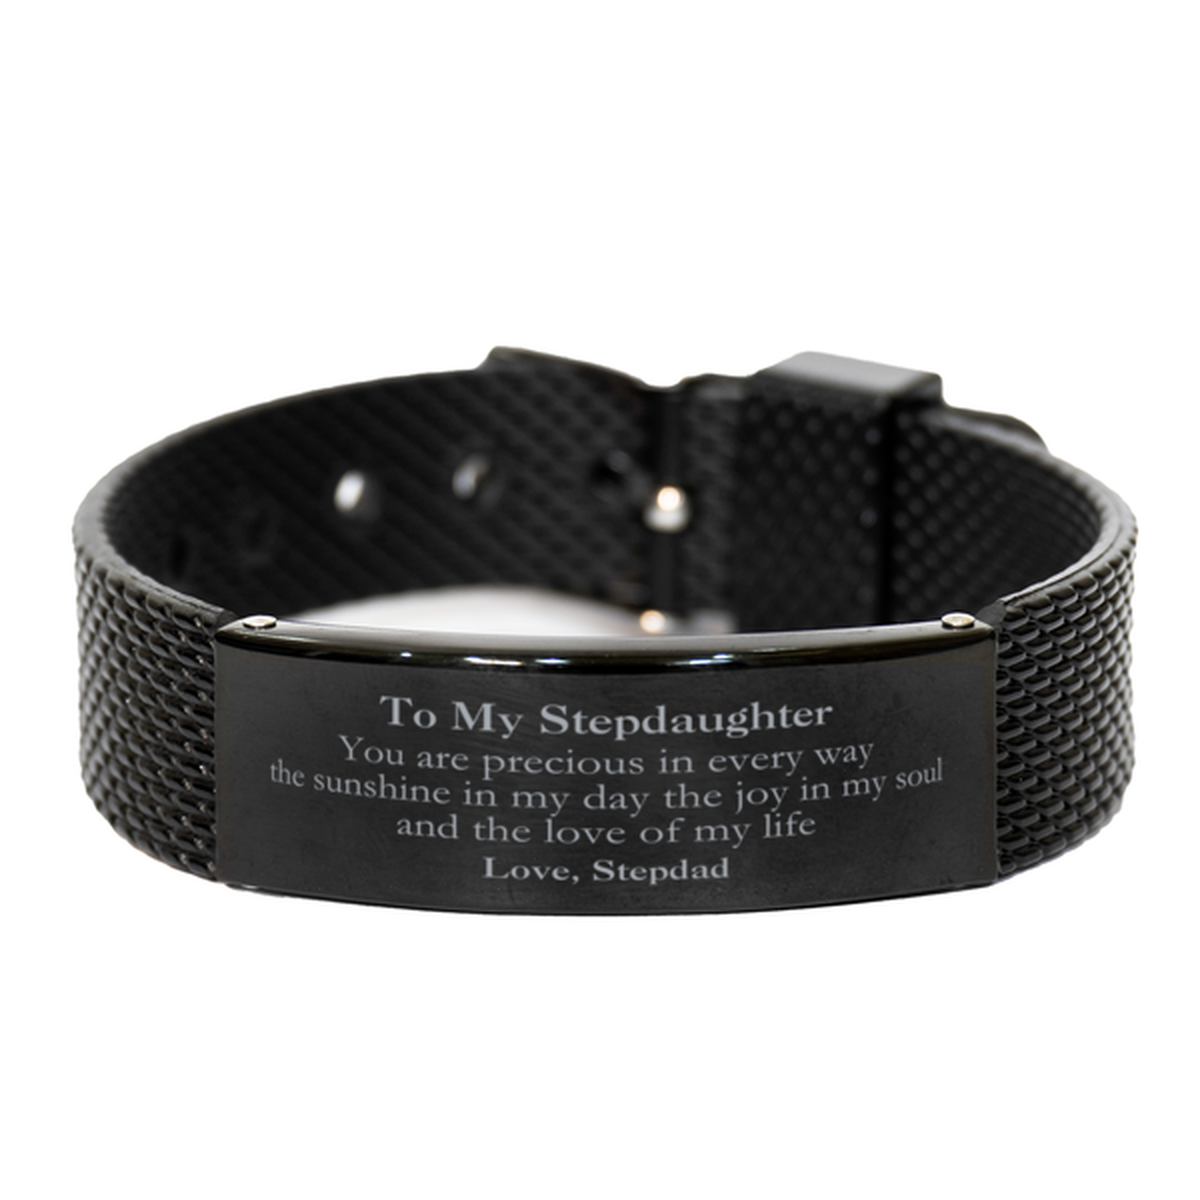 Graduation Gifts for Stepdaughter Black Shark Mesh Bracelet Present from Stepdad, Christmas Stepdaughter Birthday Gifts Stepdaughter You are precious in every way the sunshine in my day. Love, Stepdad